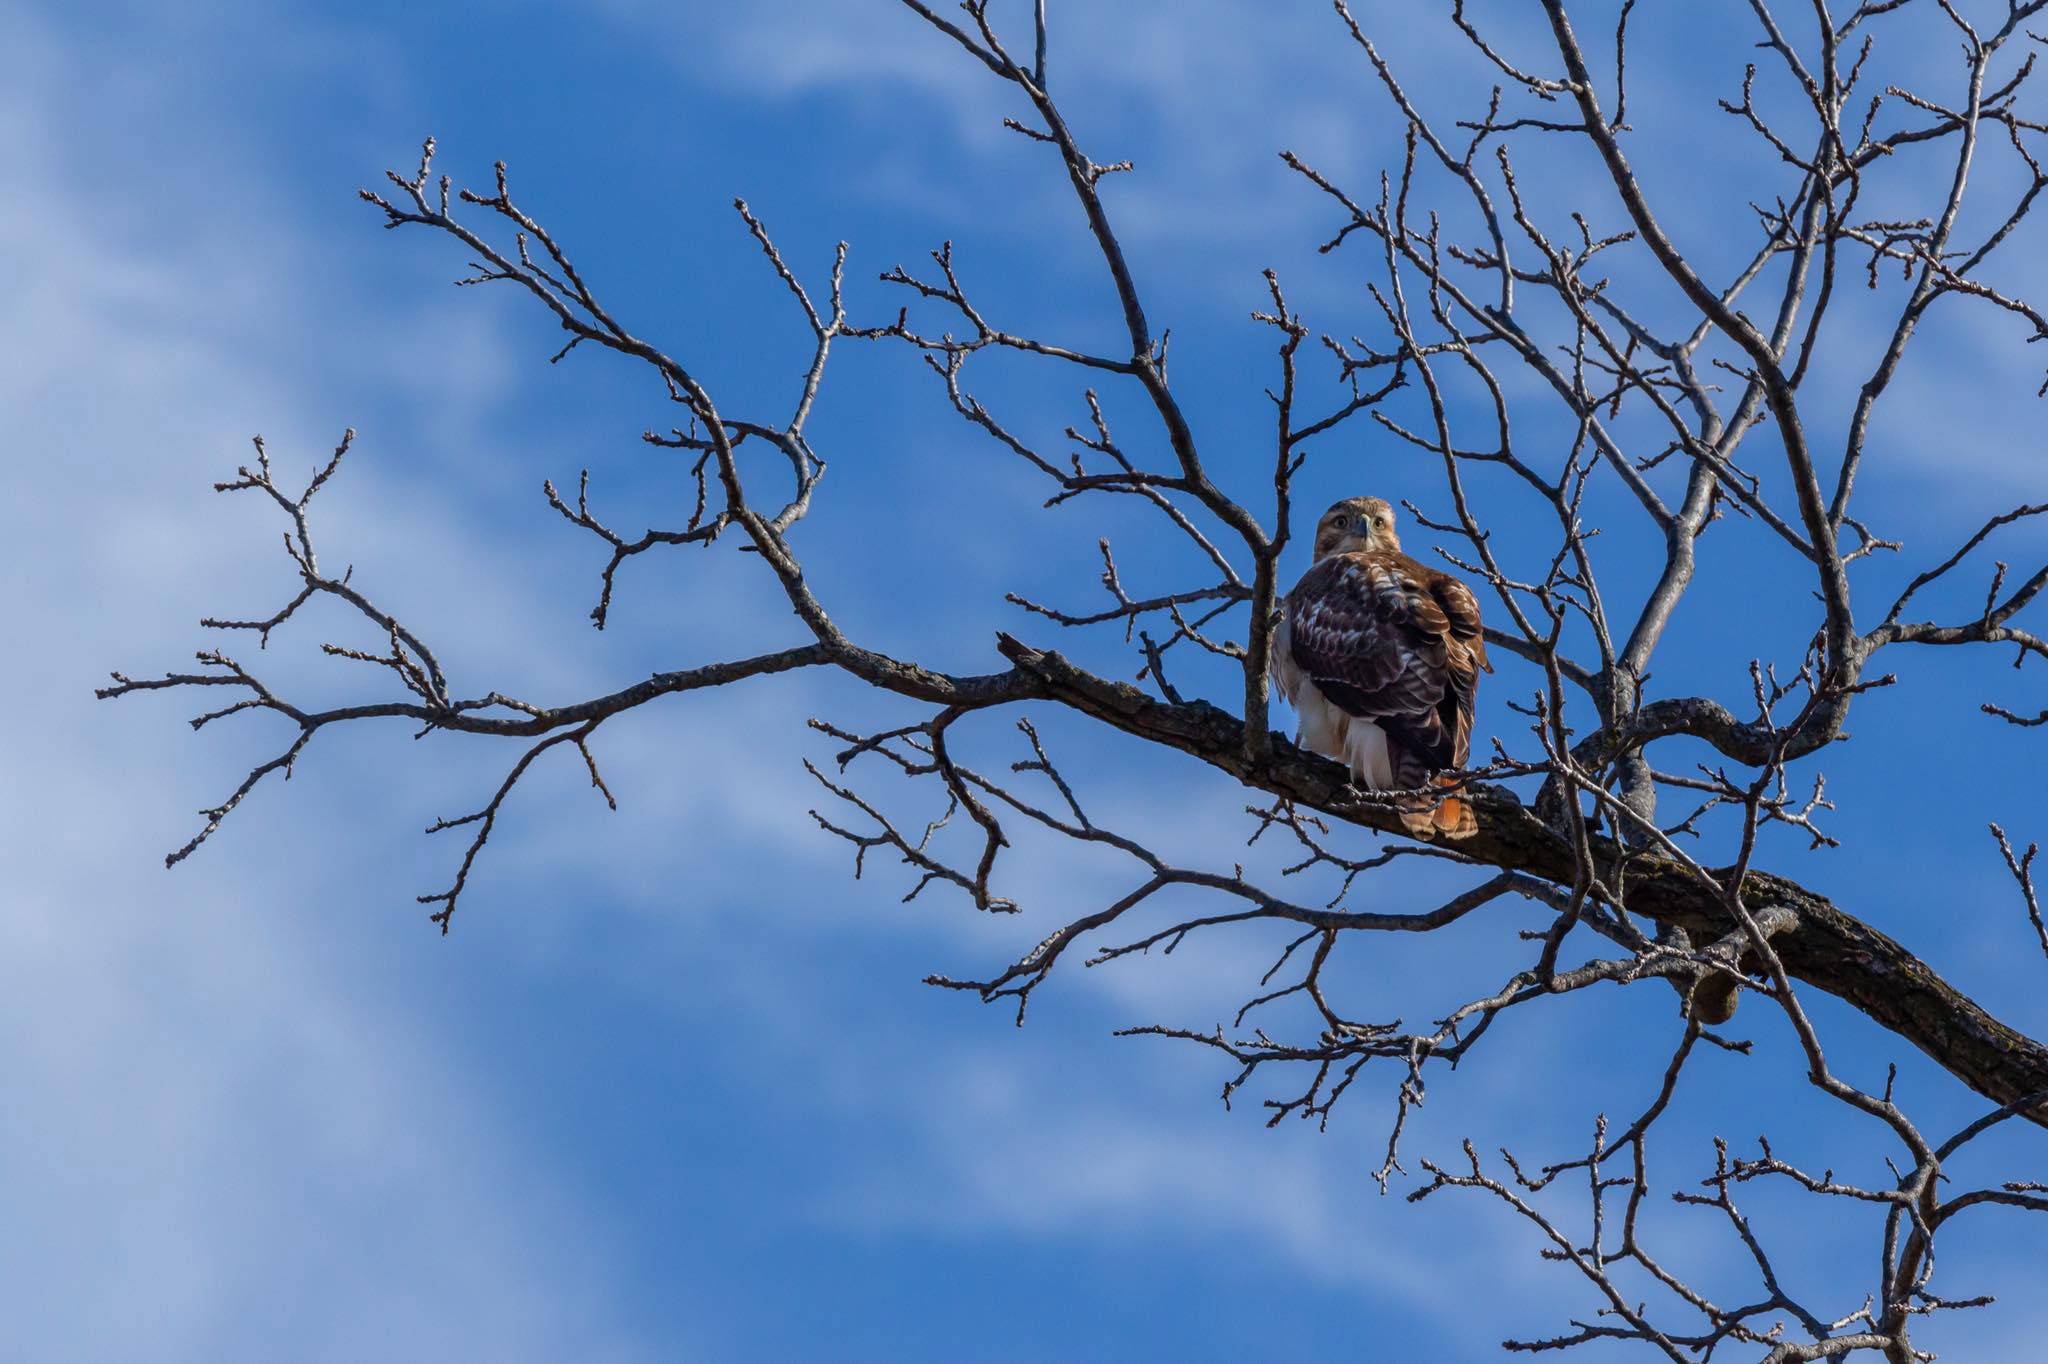 Red-tailed hawk perched high in a tree